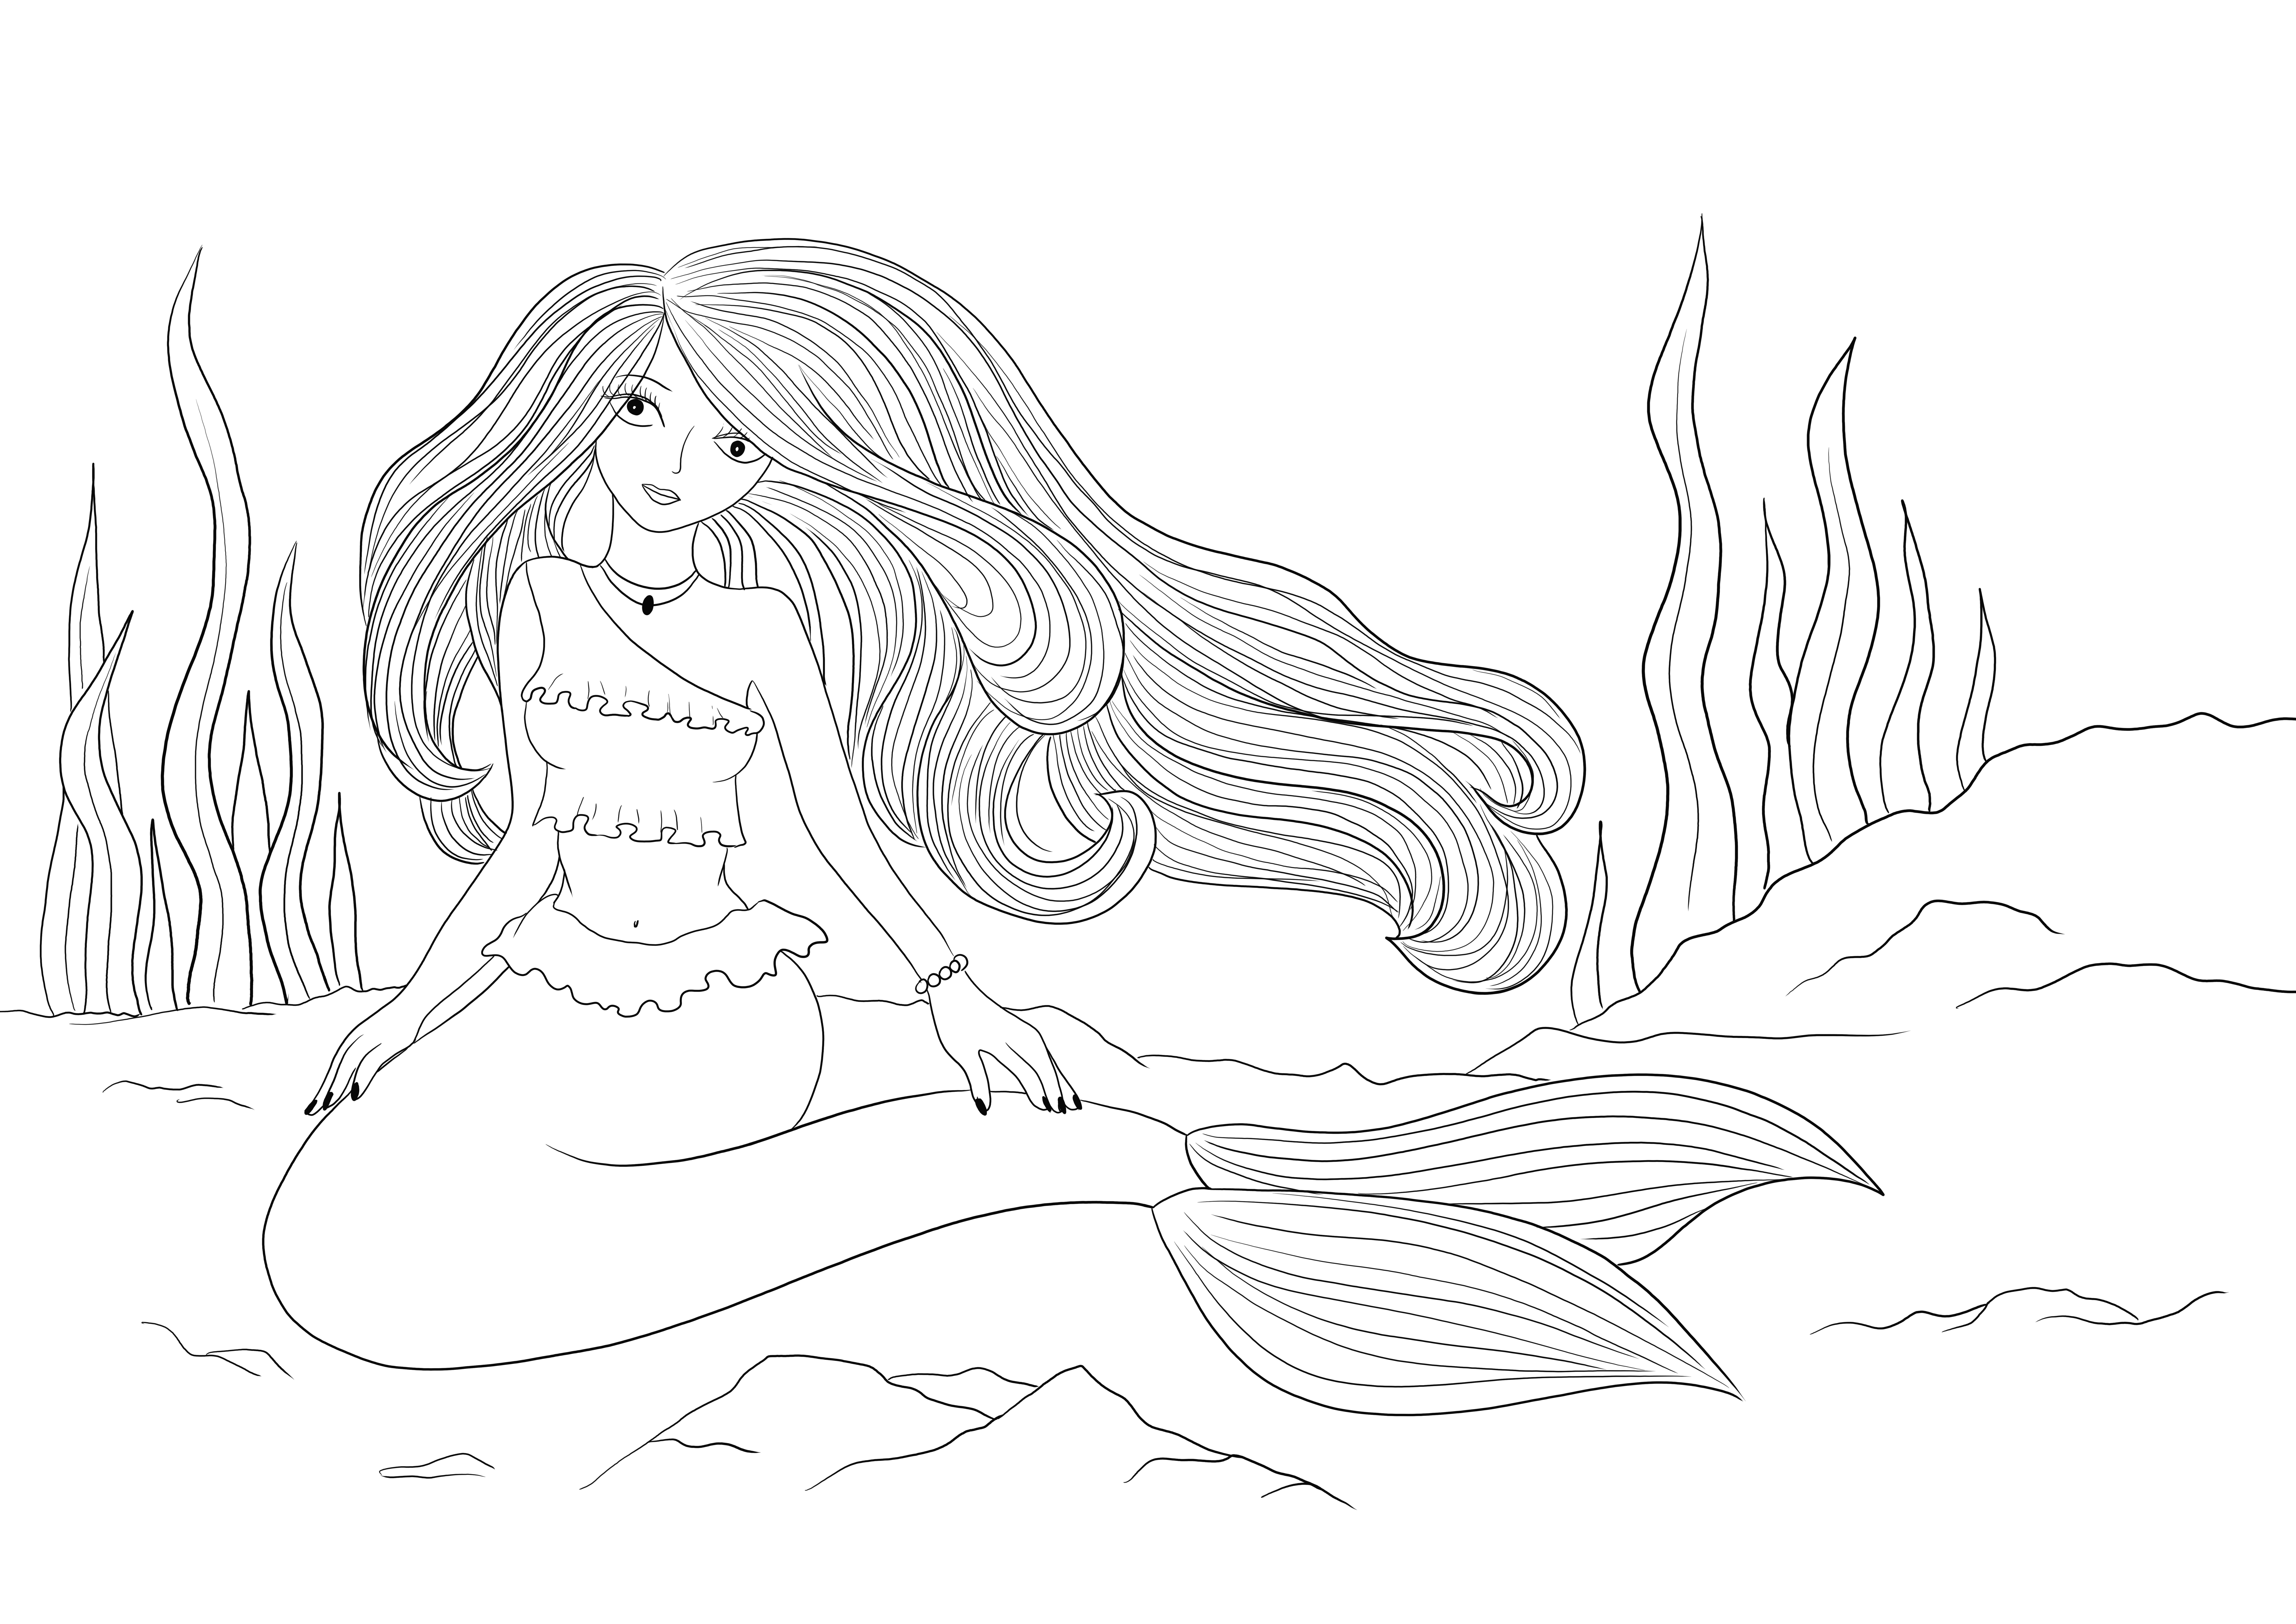 Beautiful mermaid free to color and download image.